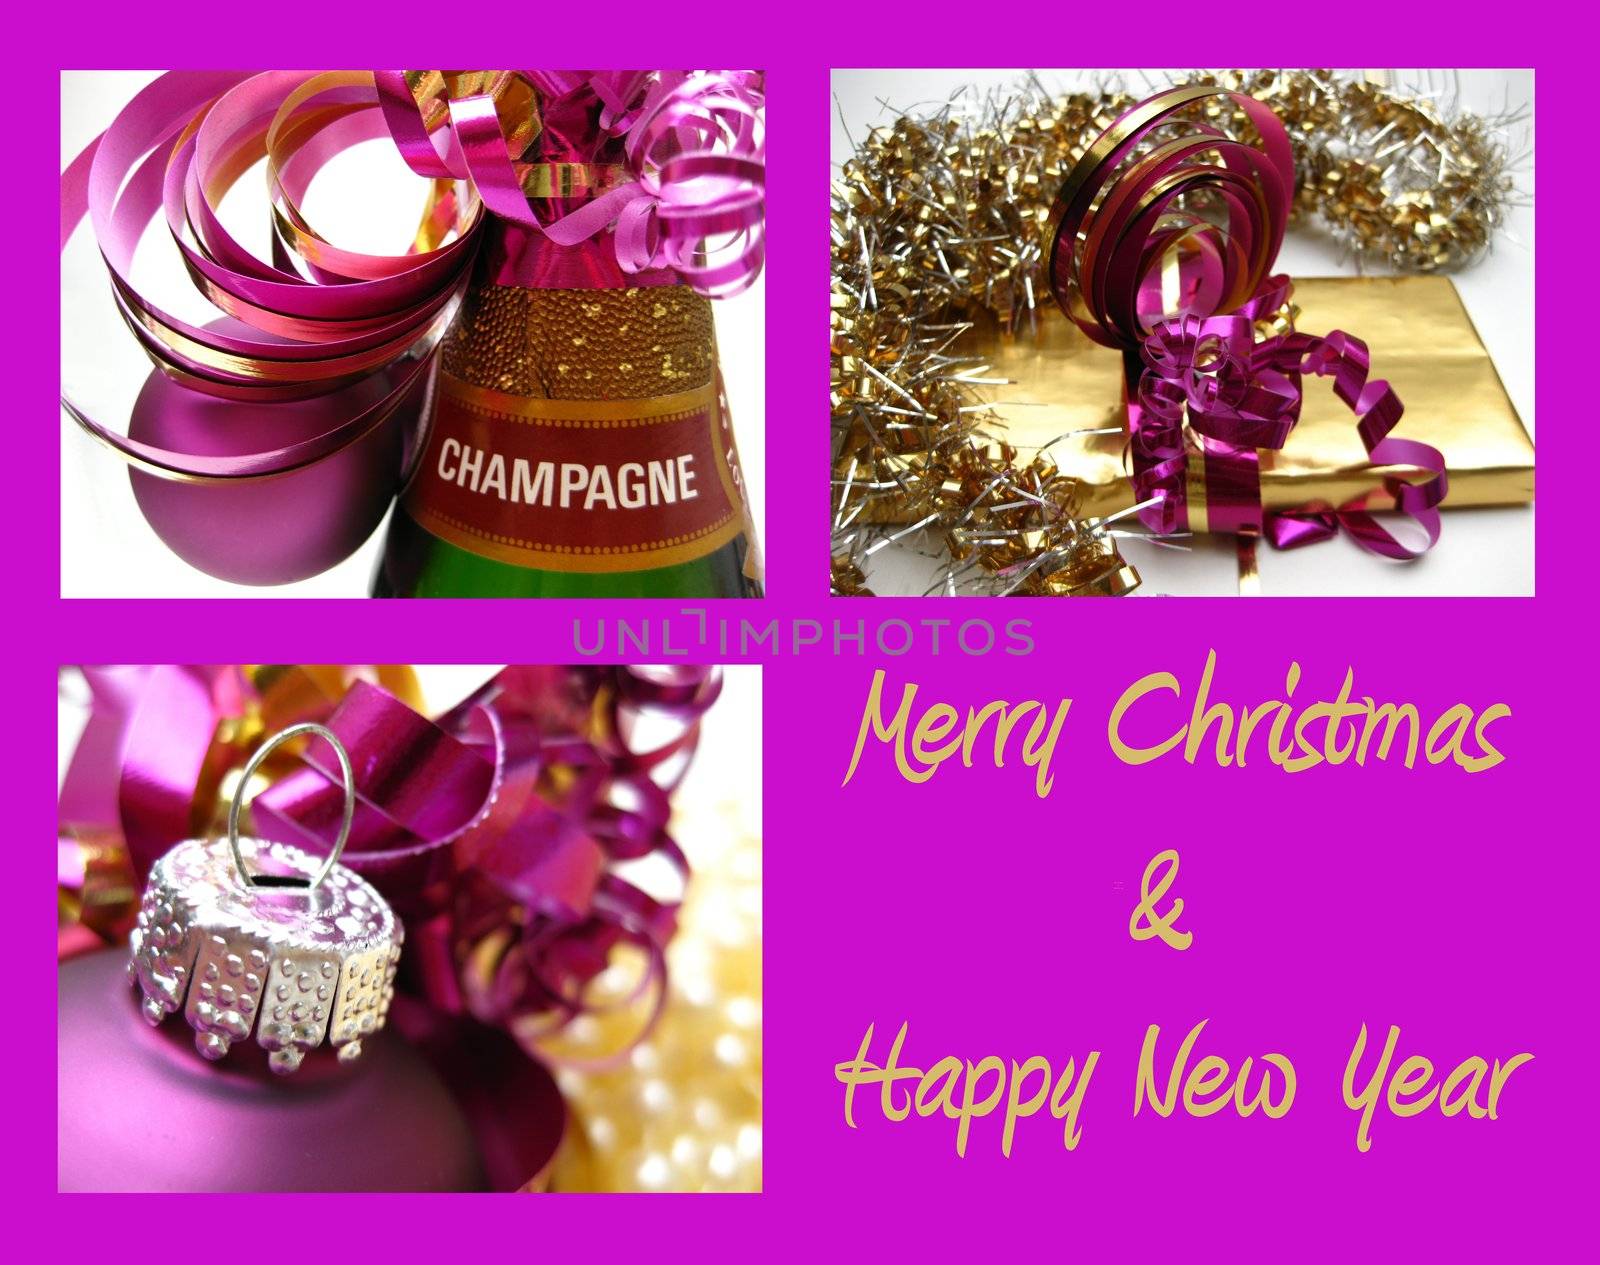 Christmas card with various images in purple